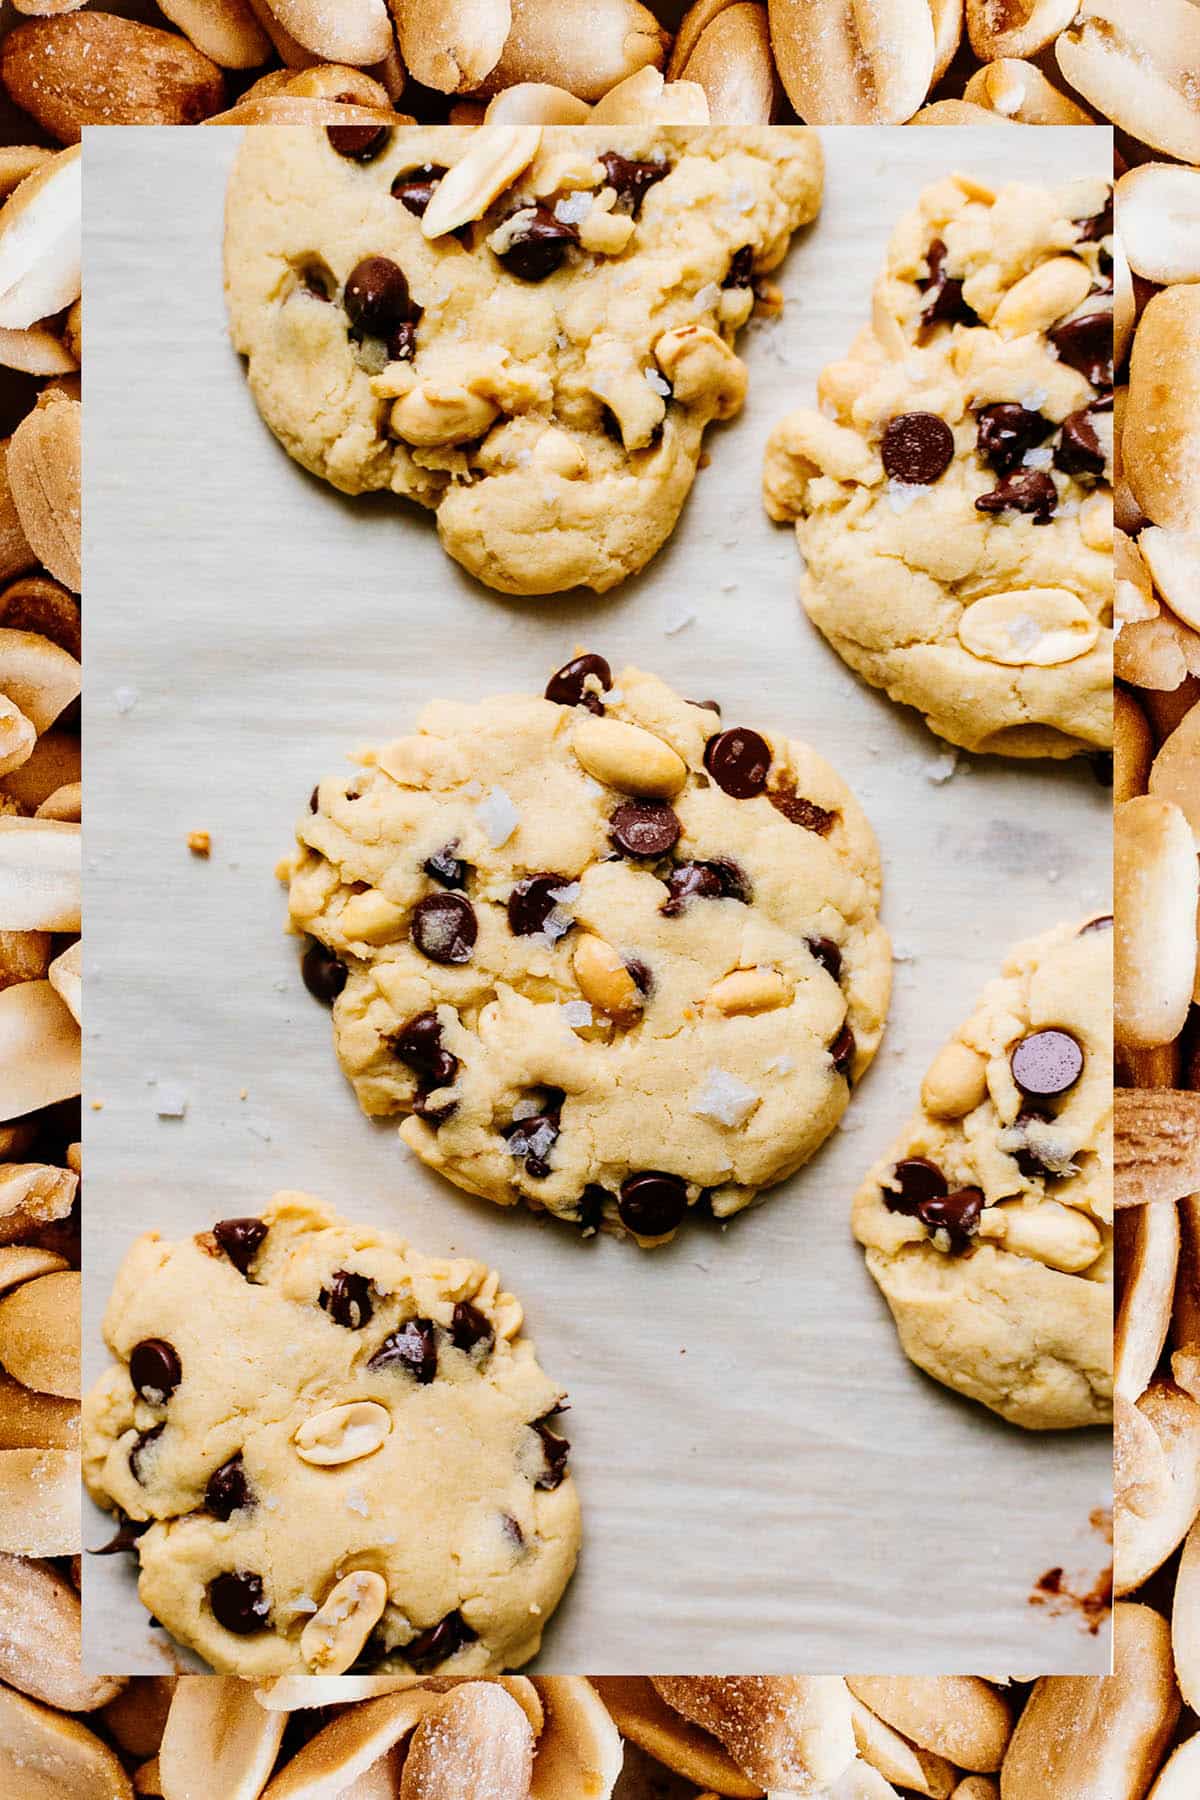 Peanut and chocolate chip cookies, with a border of peanuts.